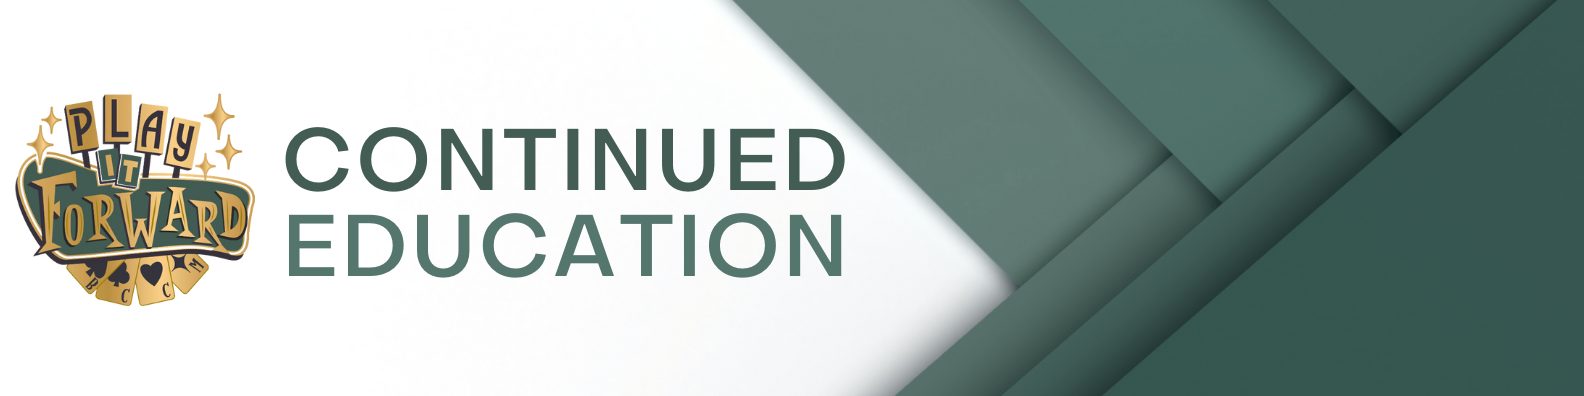 Continued Education PIF Website Banner